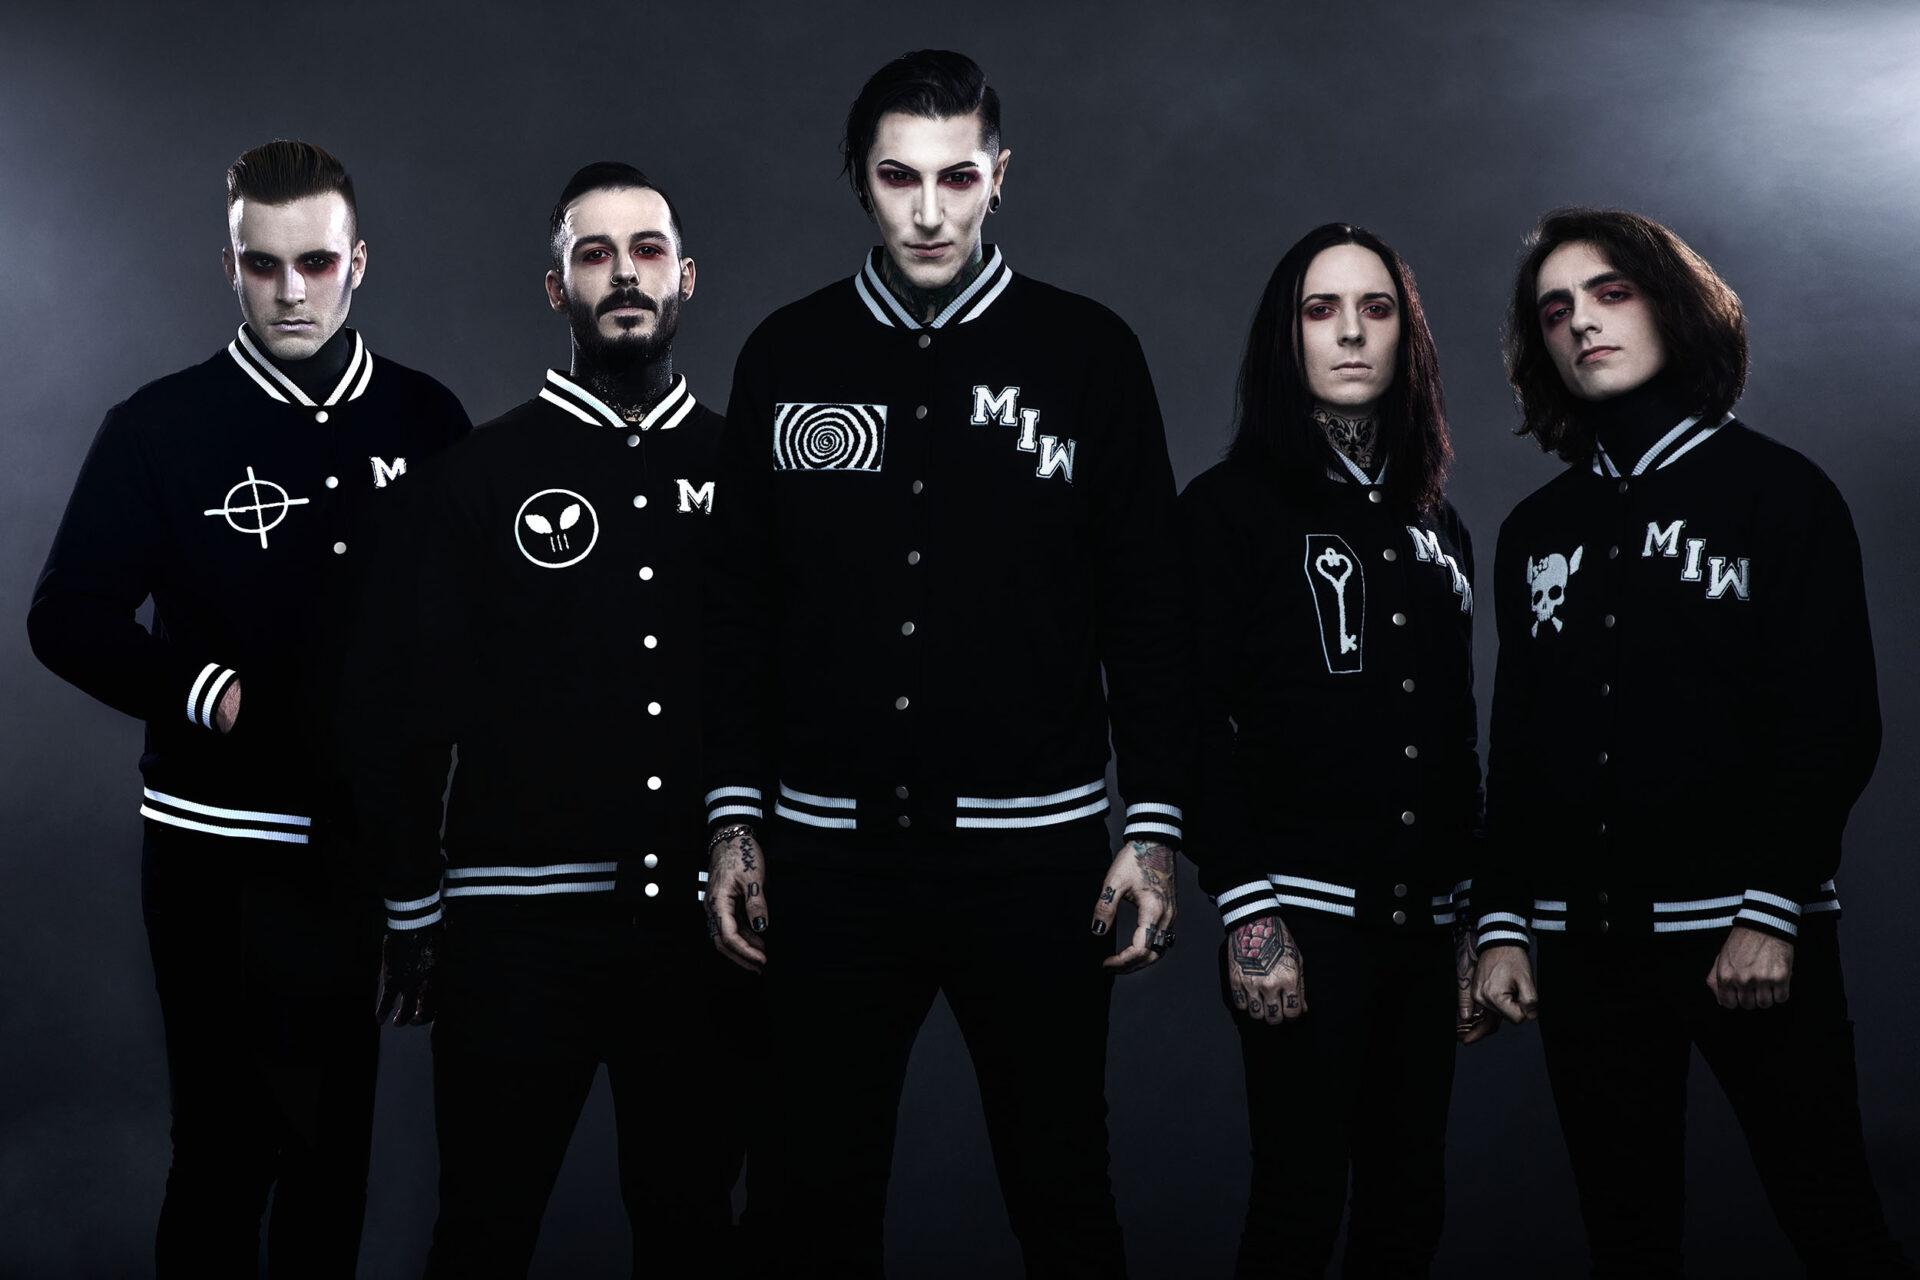 Motionless In White cover The Killers’ “Somebody Told Me”